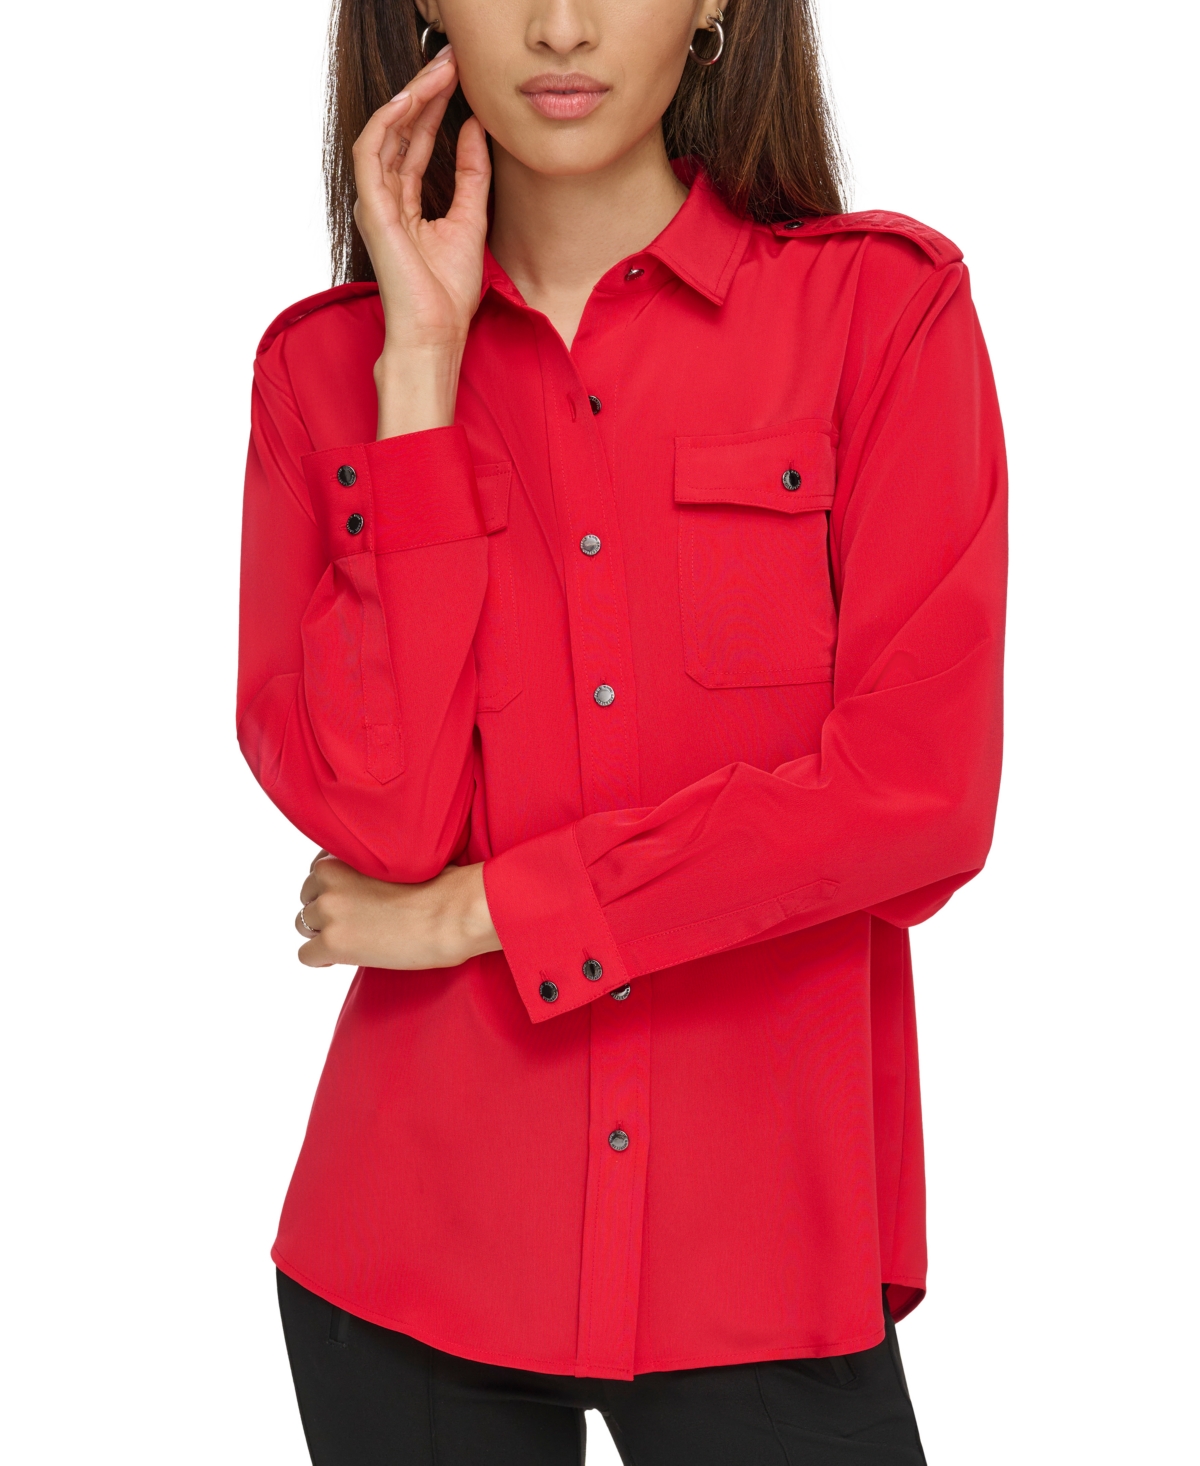 Karl Lagerfeld Women's Epaulette Button Up Shirt In Admiral Red